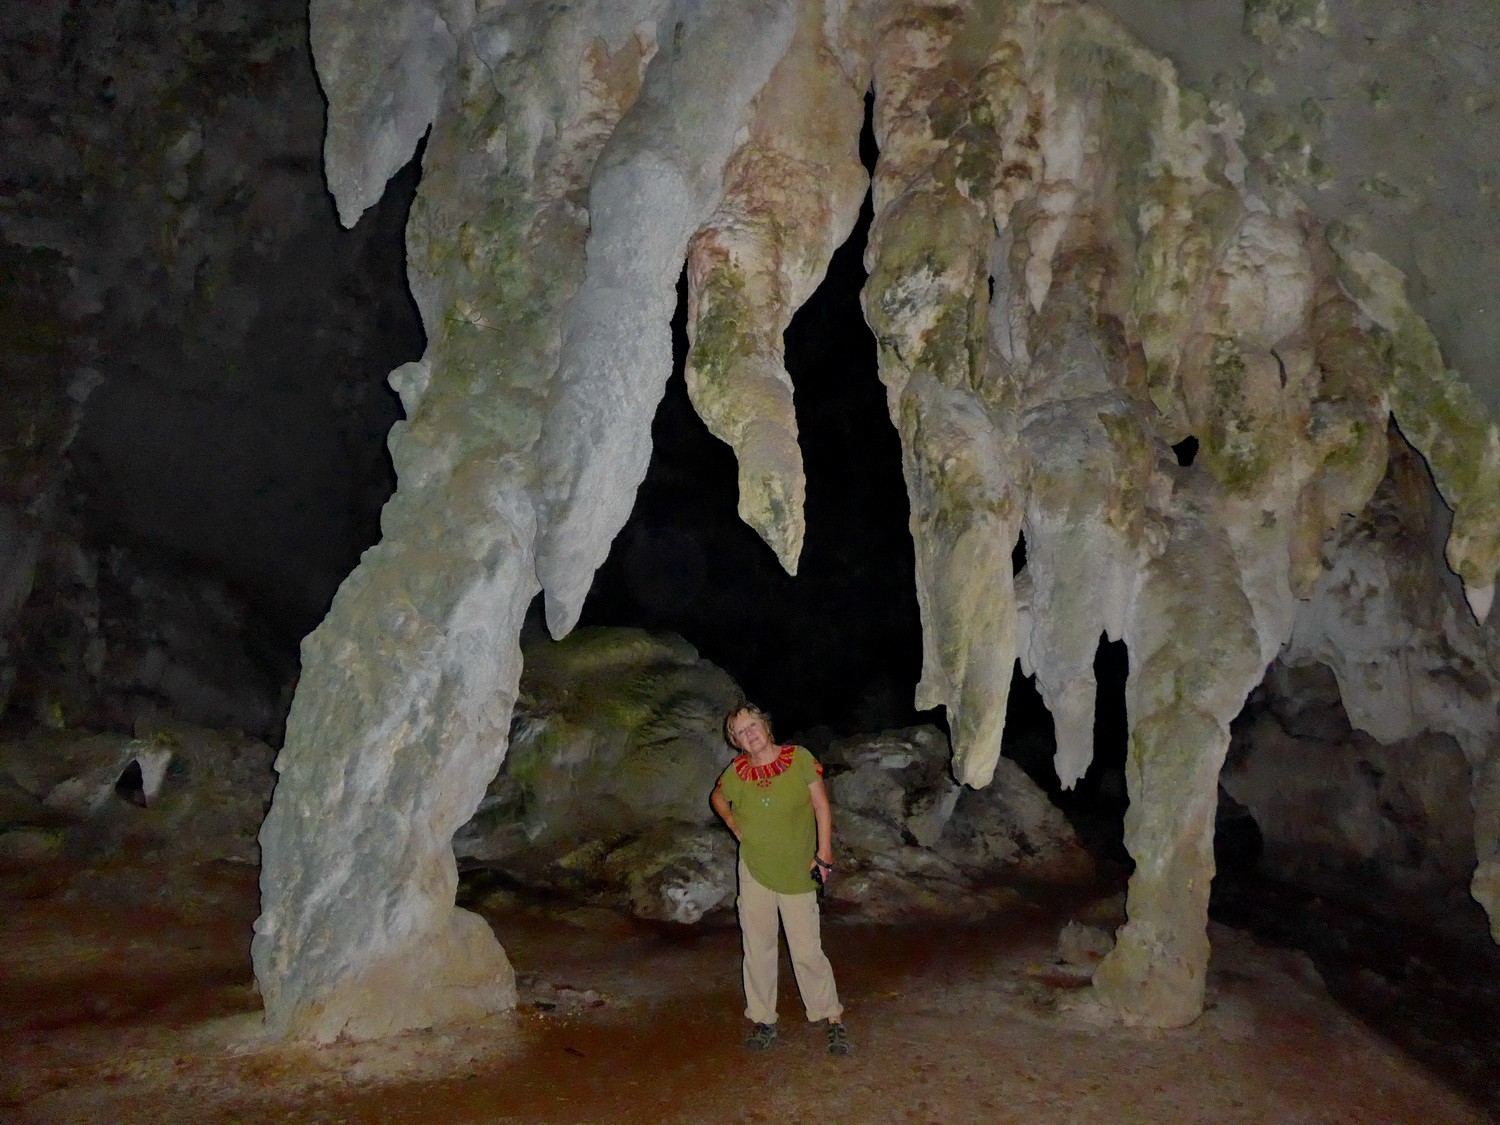 Marion in the cave